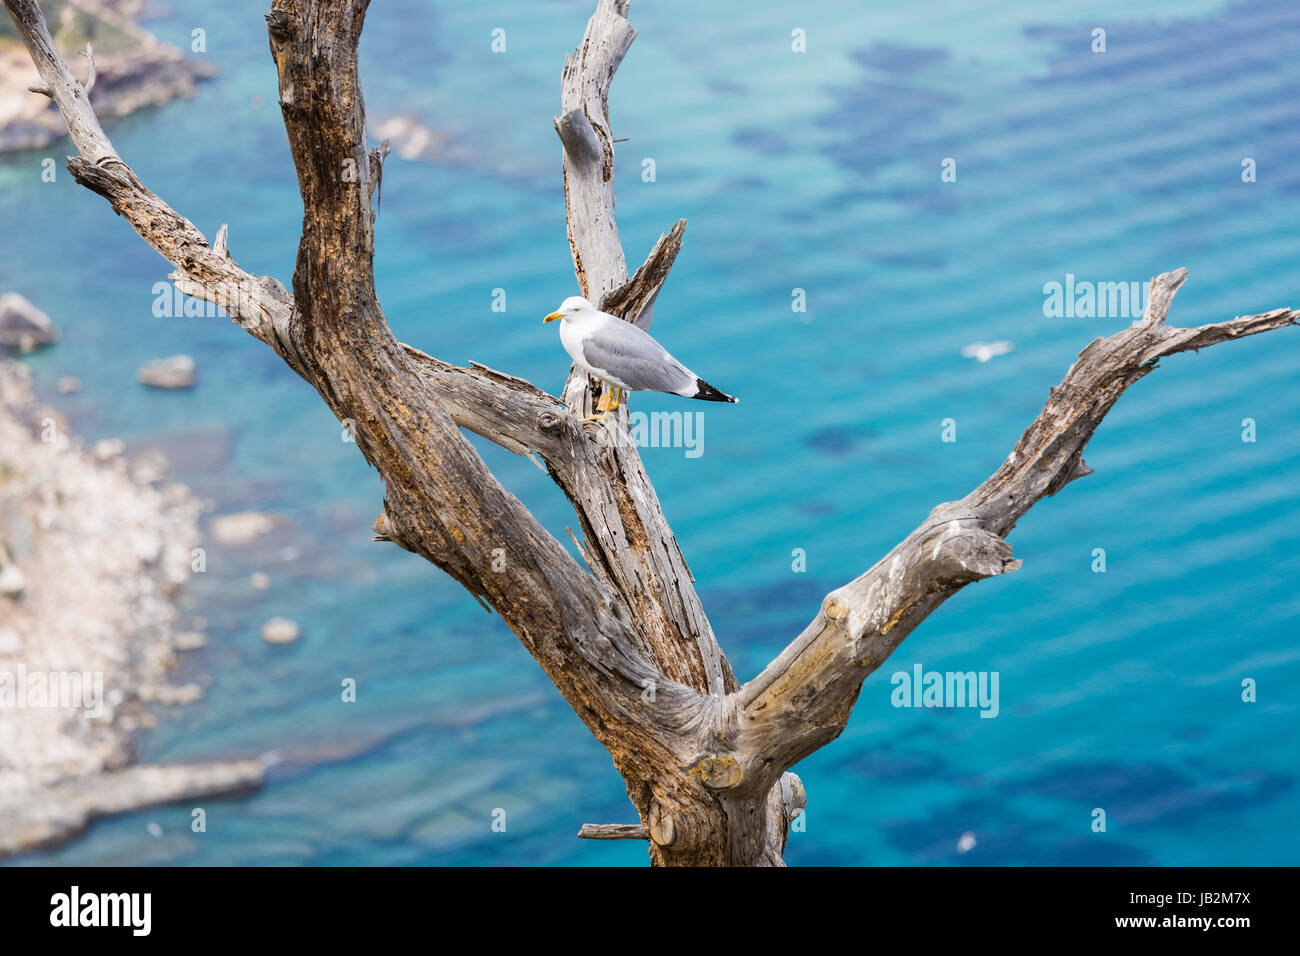 Seagull standing on dead tree, branch, wood Stock Photo